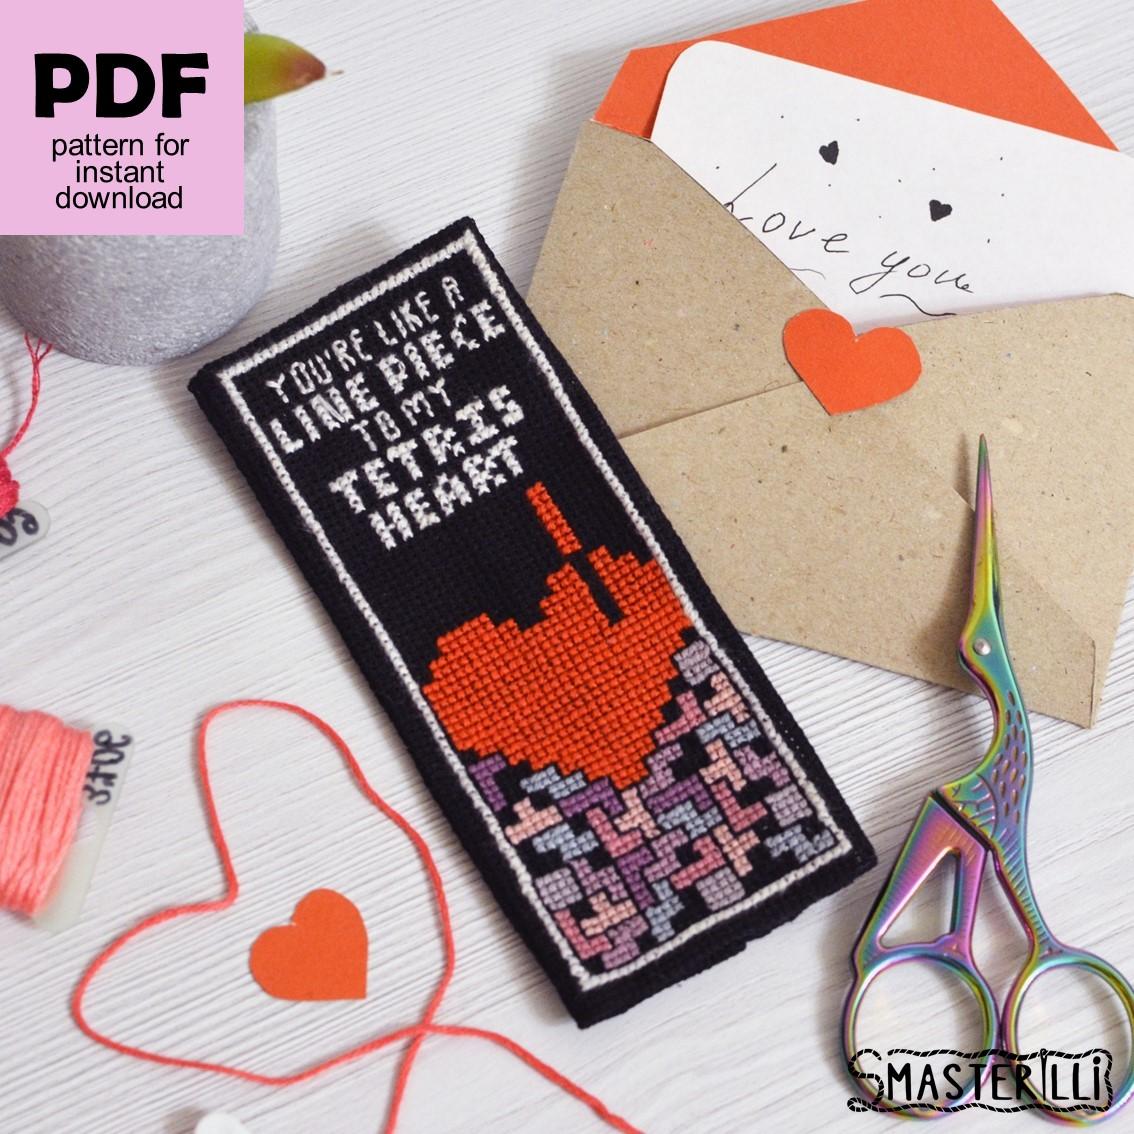 Bookmark cross stitch pattern with tetris blocks , heart an love wishes. Perfect and easy idea for Valentine's day gift by Smasterilli. Digital cross stitch pattern for instant download. Book Lover's Craft #smasterilli #crossstitch #crossstitchpattern #lovecrossstitch #valentinedaygift #tetris #easycrossstitch #tinycrossstitch #heartcrossstitch